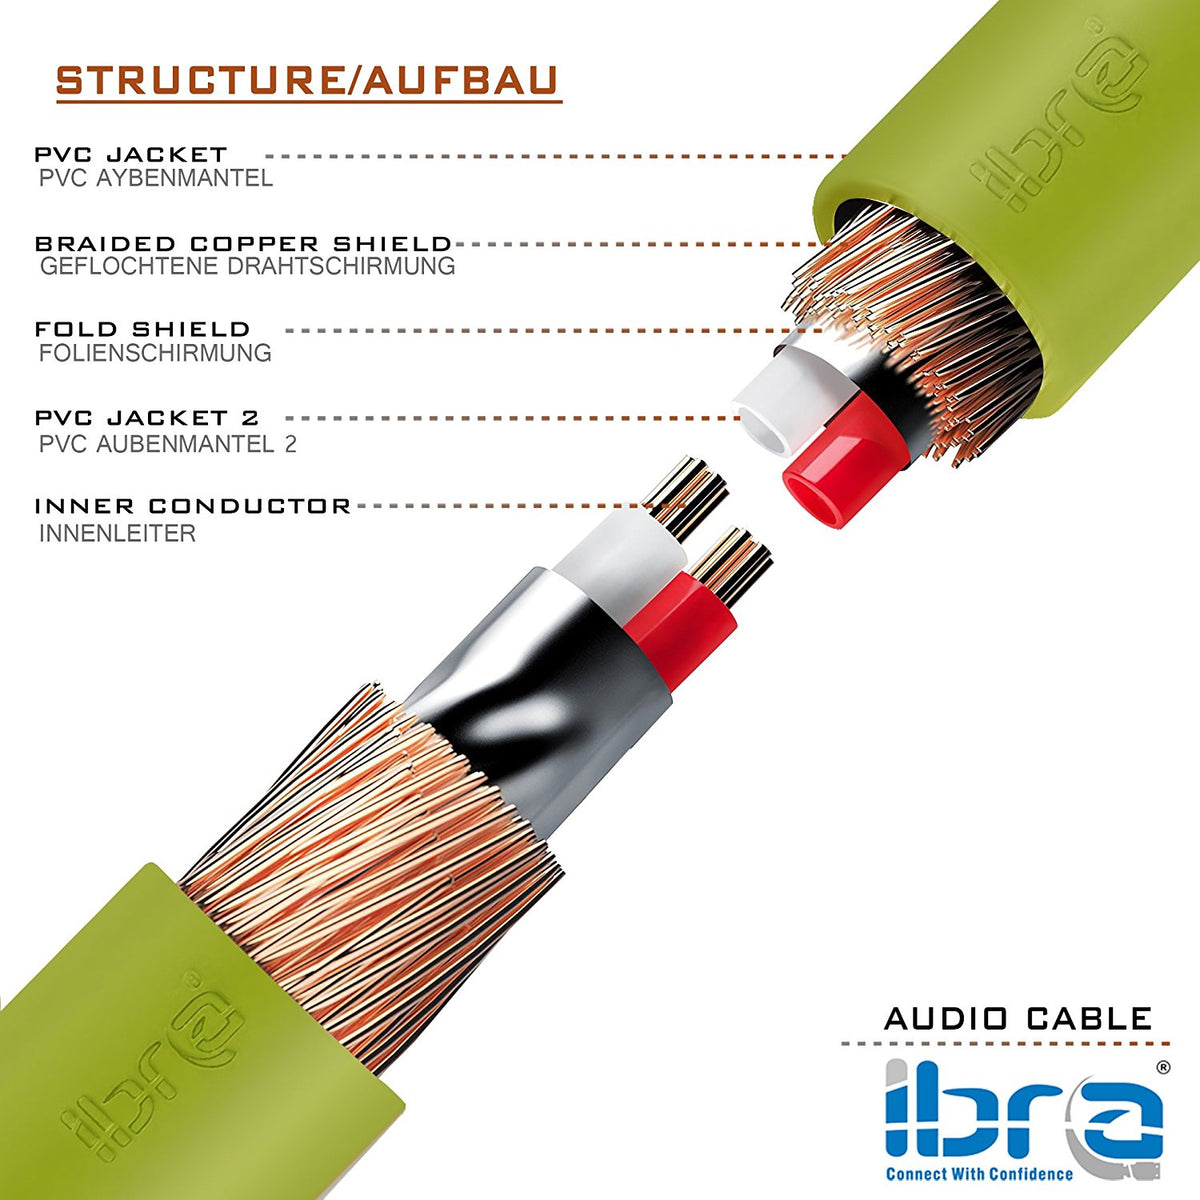 Aux Cable 1.5M 3.5mm Stereo Pro Auxiliary Audio Cable - for Beats Headphones Apple iPod iPhone iPad Samsung LG Smartphone MP3 Player Home / Car etc - IBRA Green